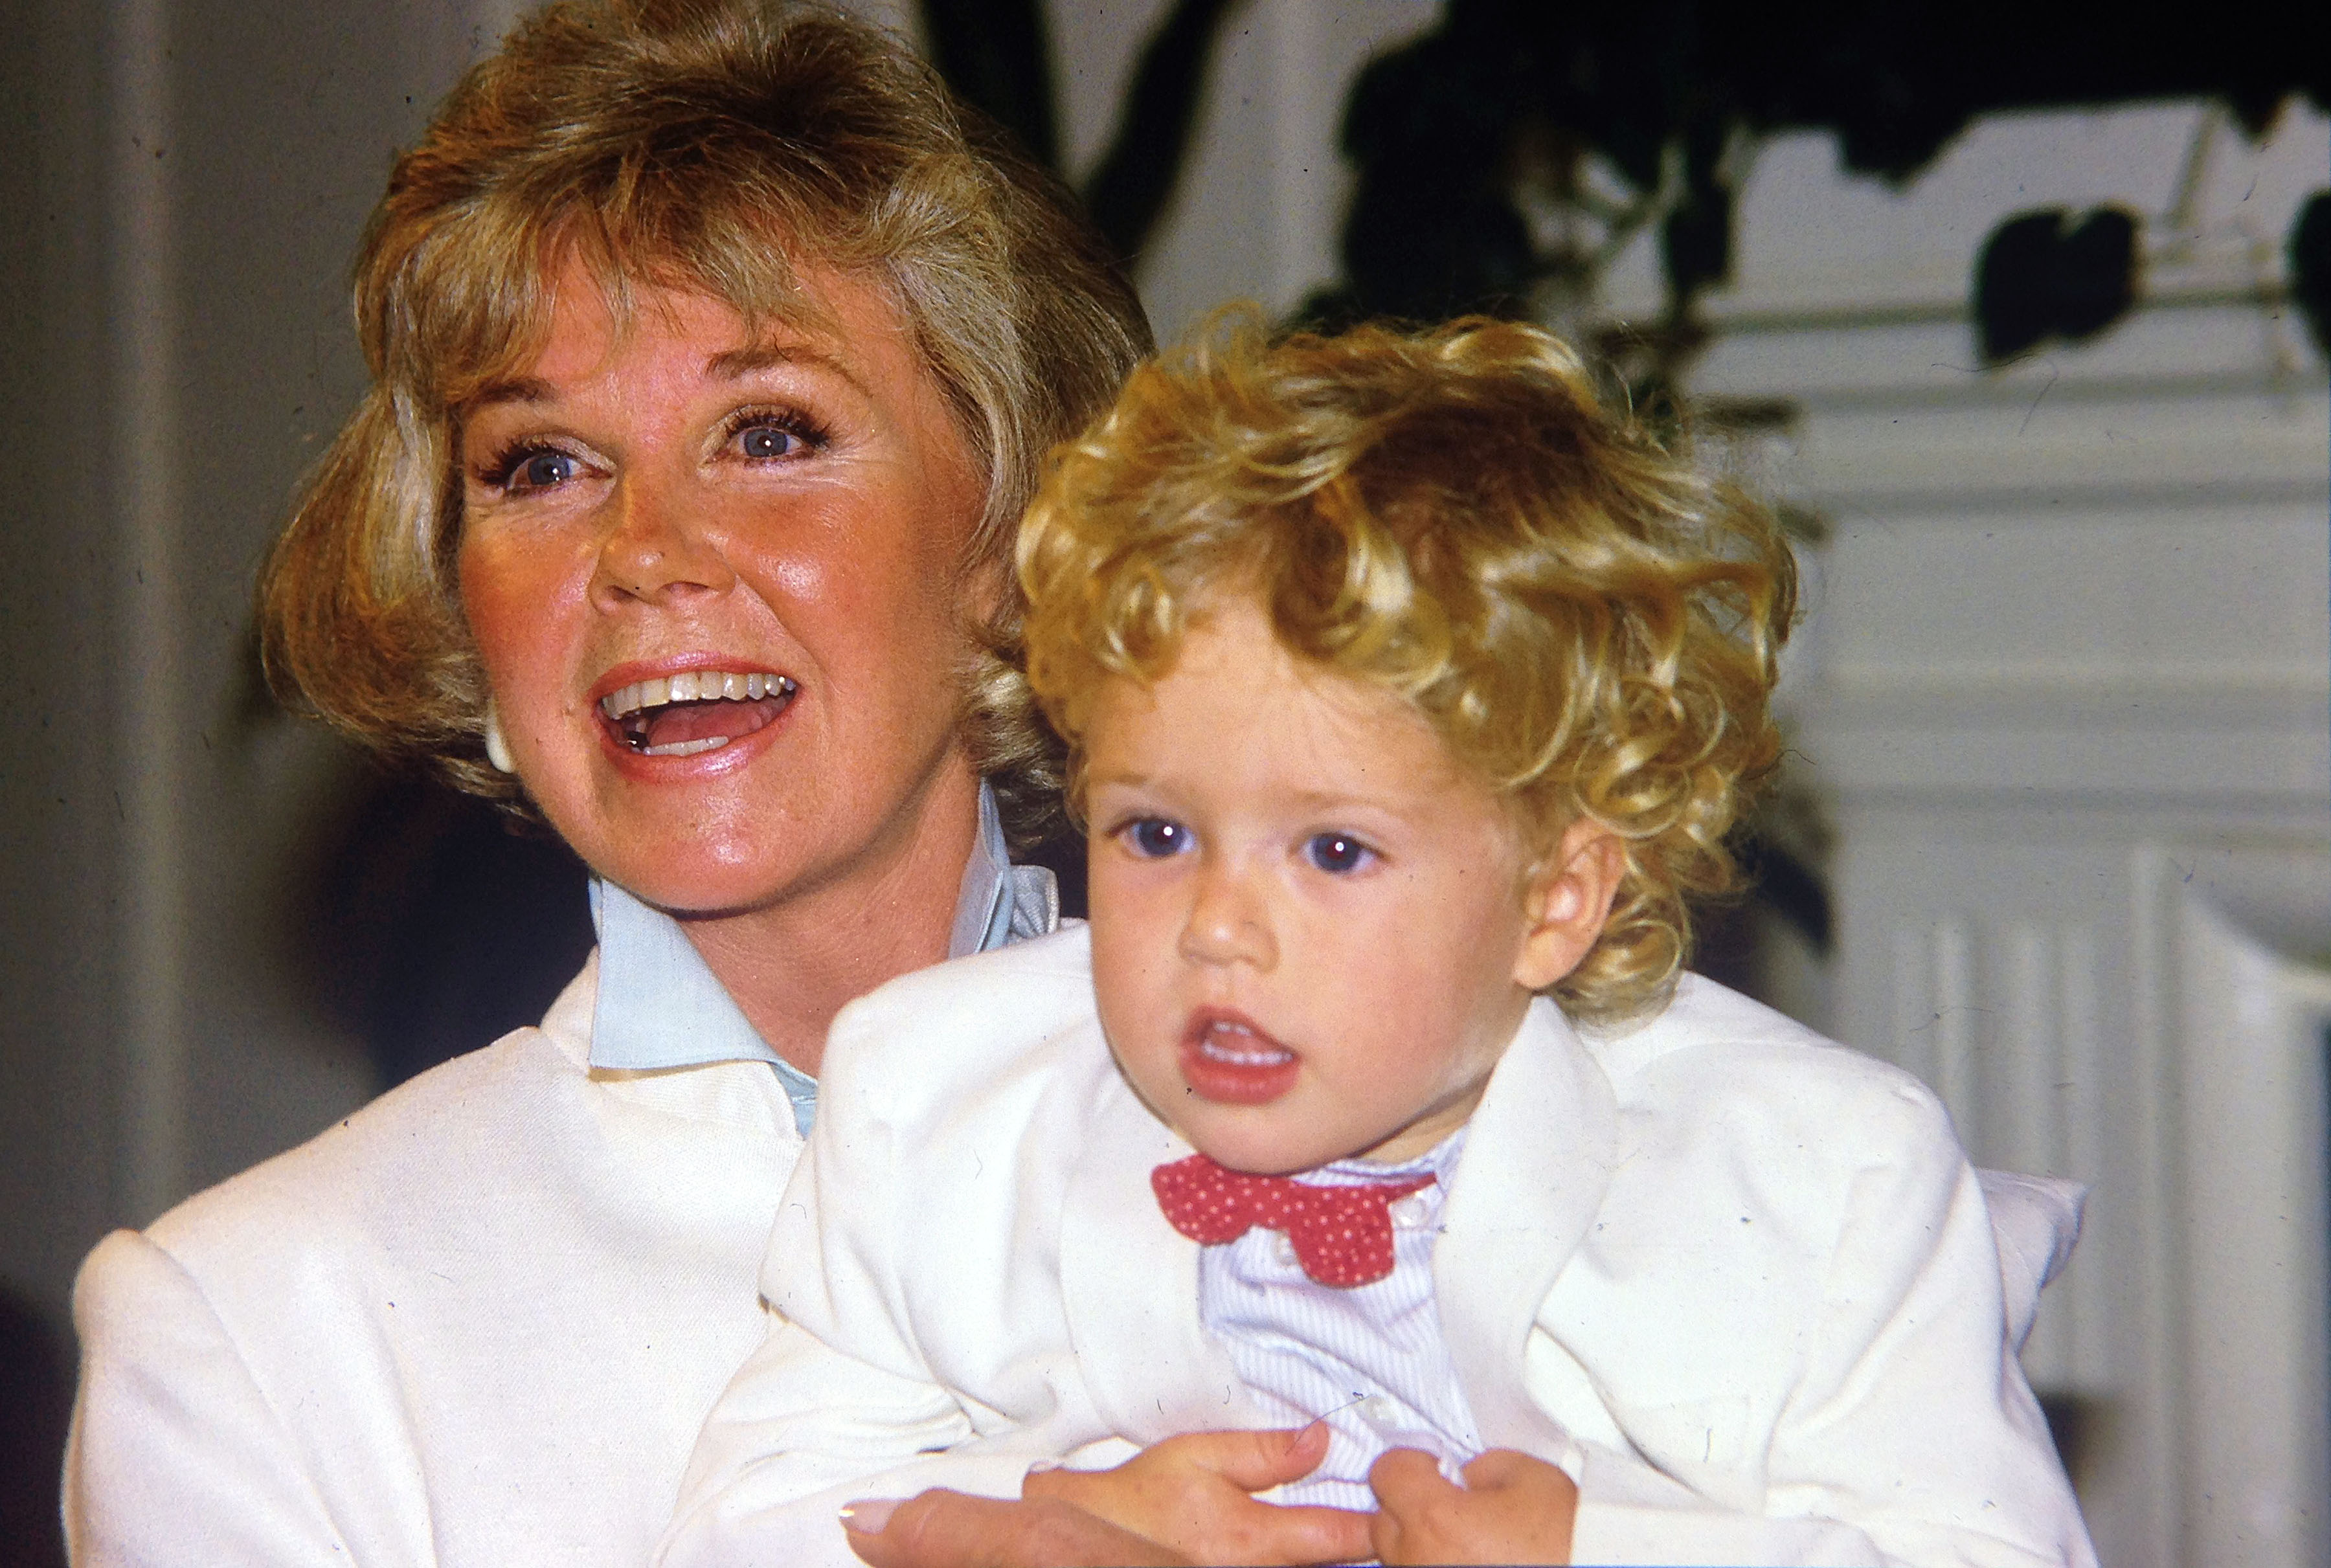 Singer Doris Day with her grandson Ryan Melcher at a press conference on July 16, 1985 in Carmel, California | Source: Getty Images